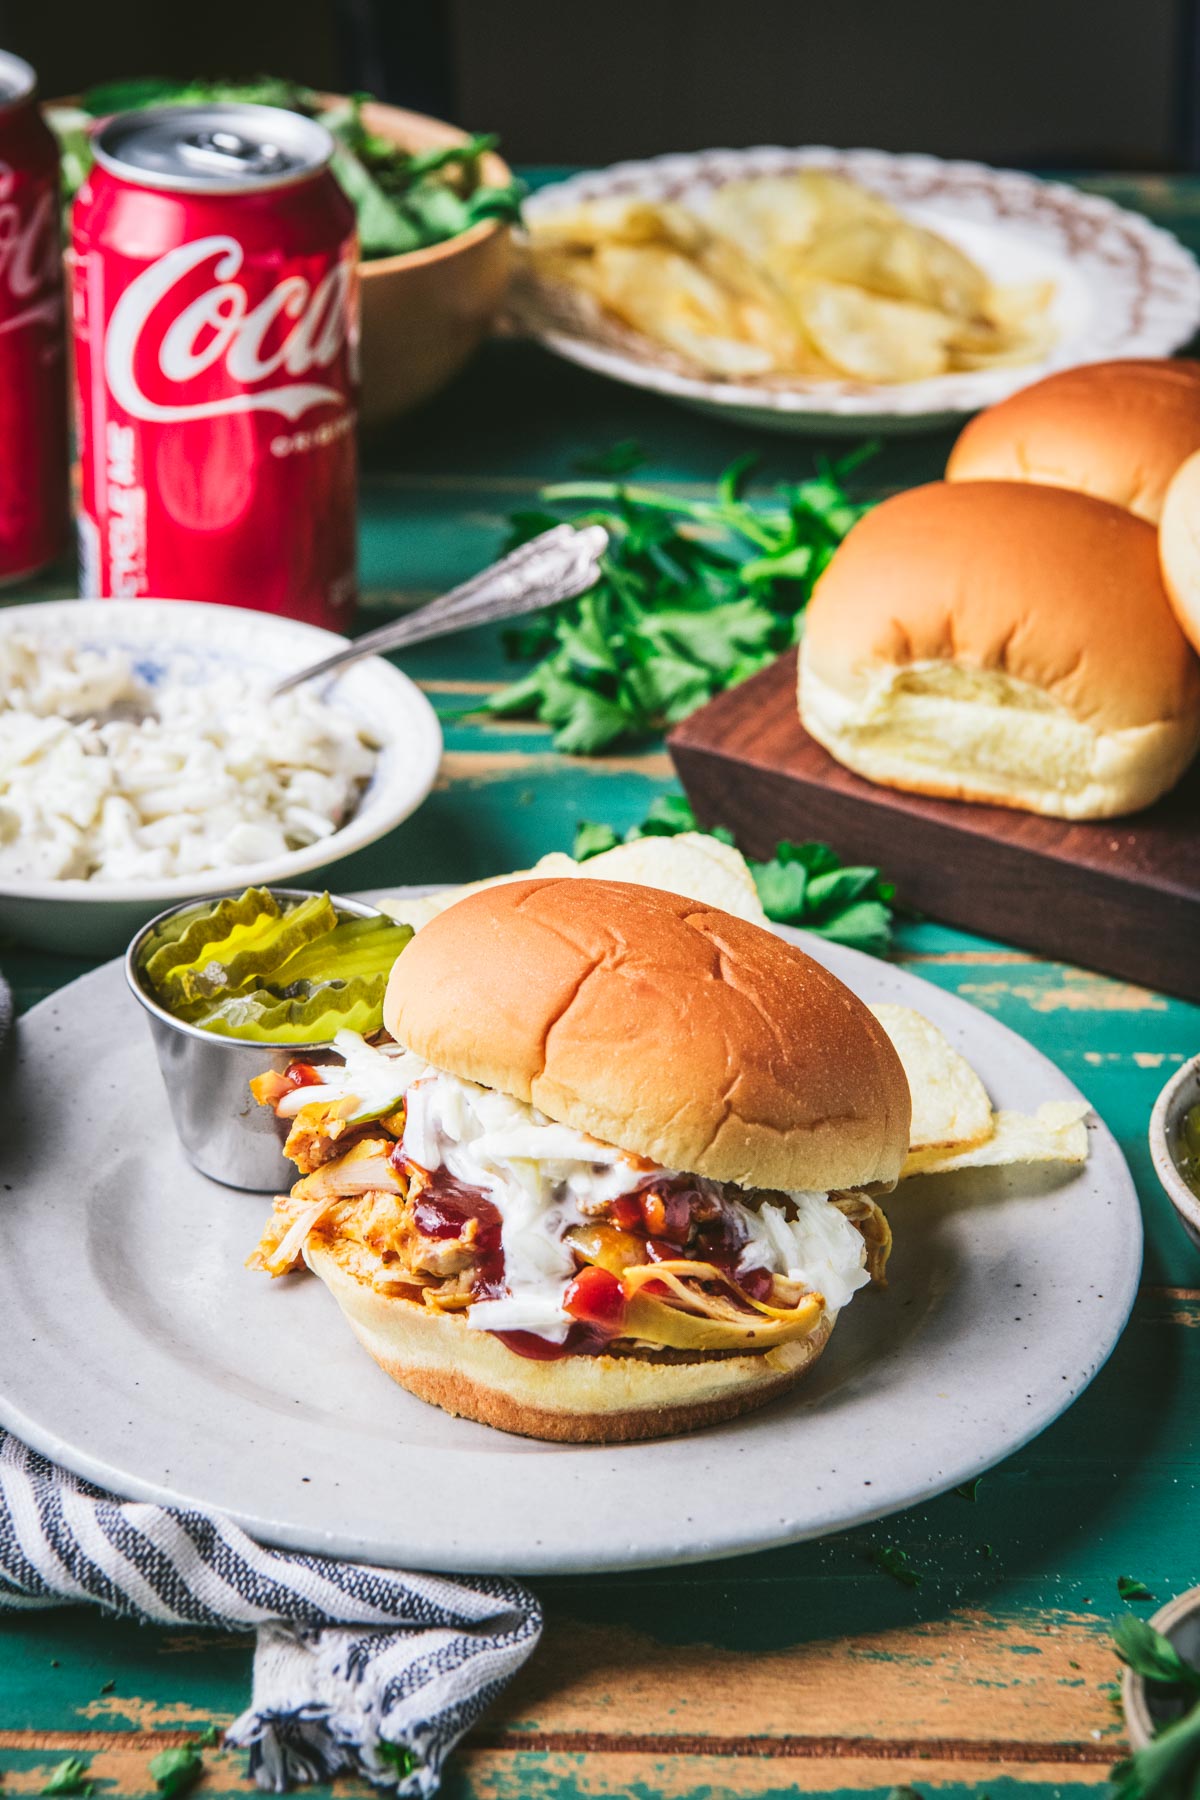 Coca cola chicken sandwich on a plate with sides in the background